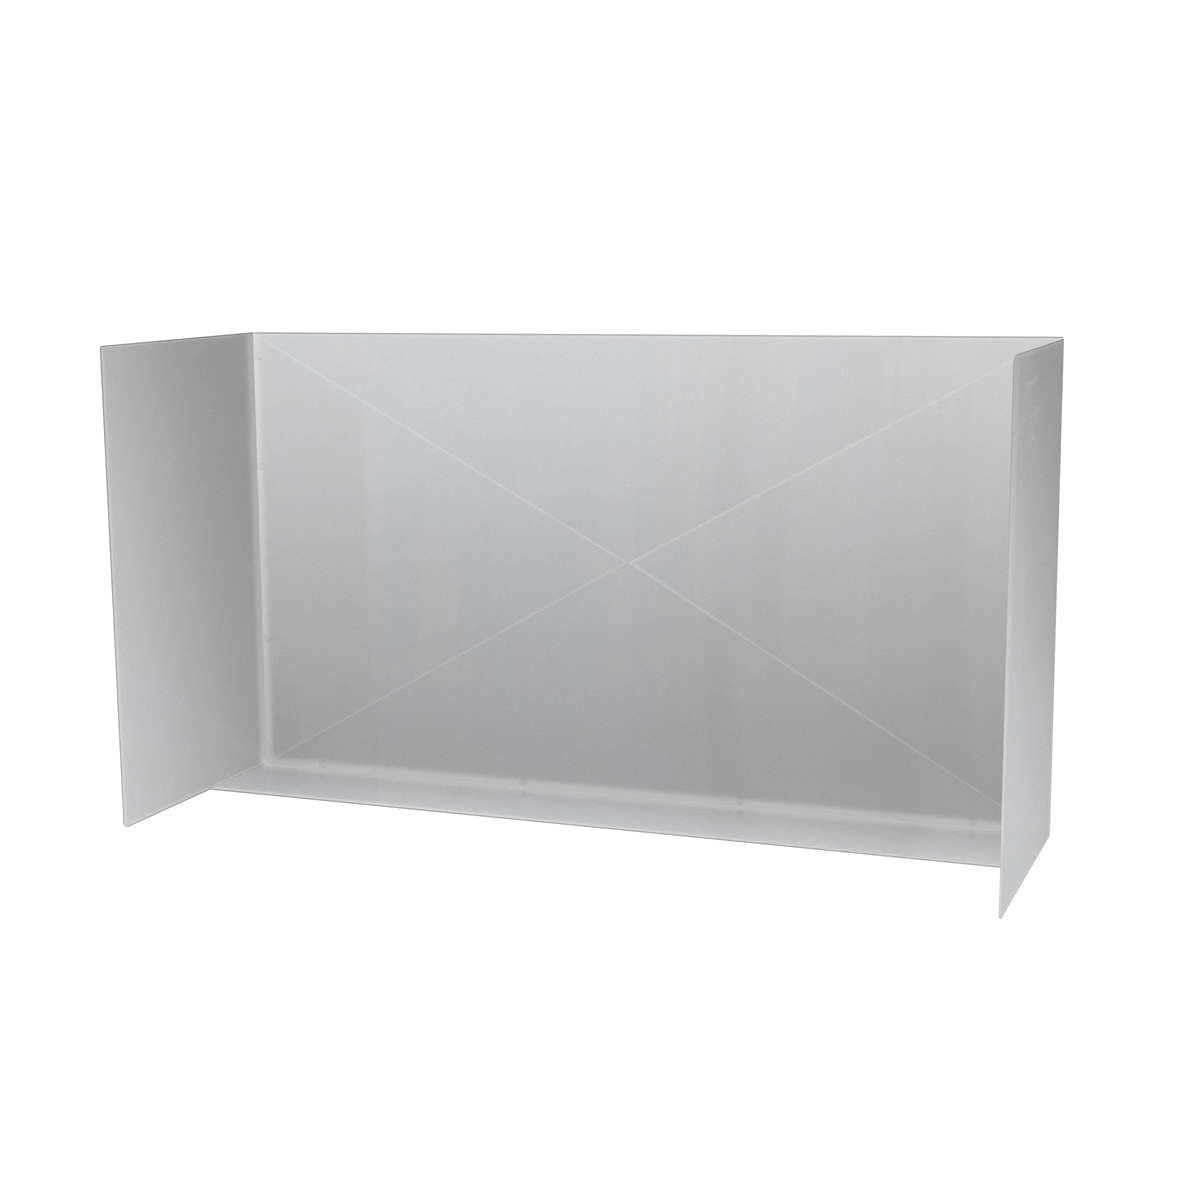 36" Stainless Steel Wind Guard (Fits 30-32" Grills)